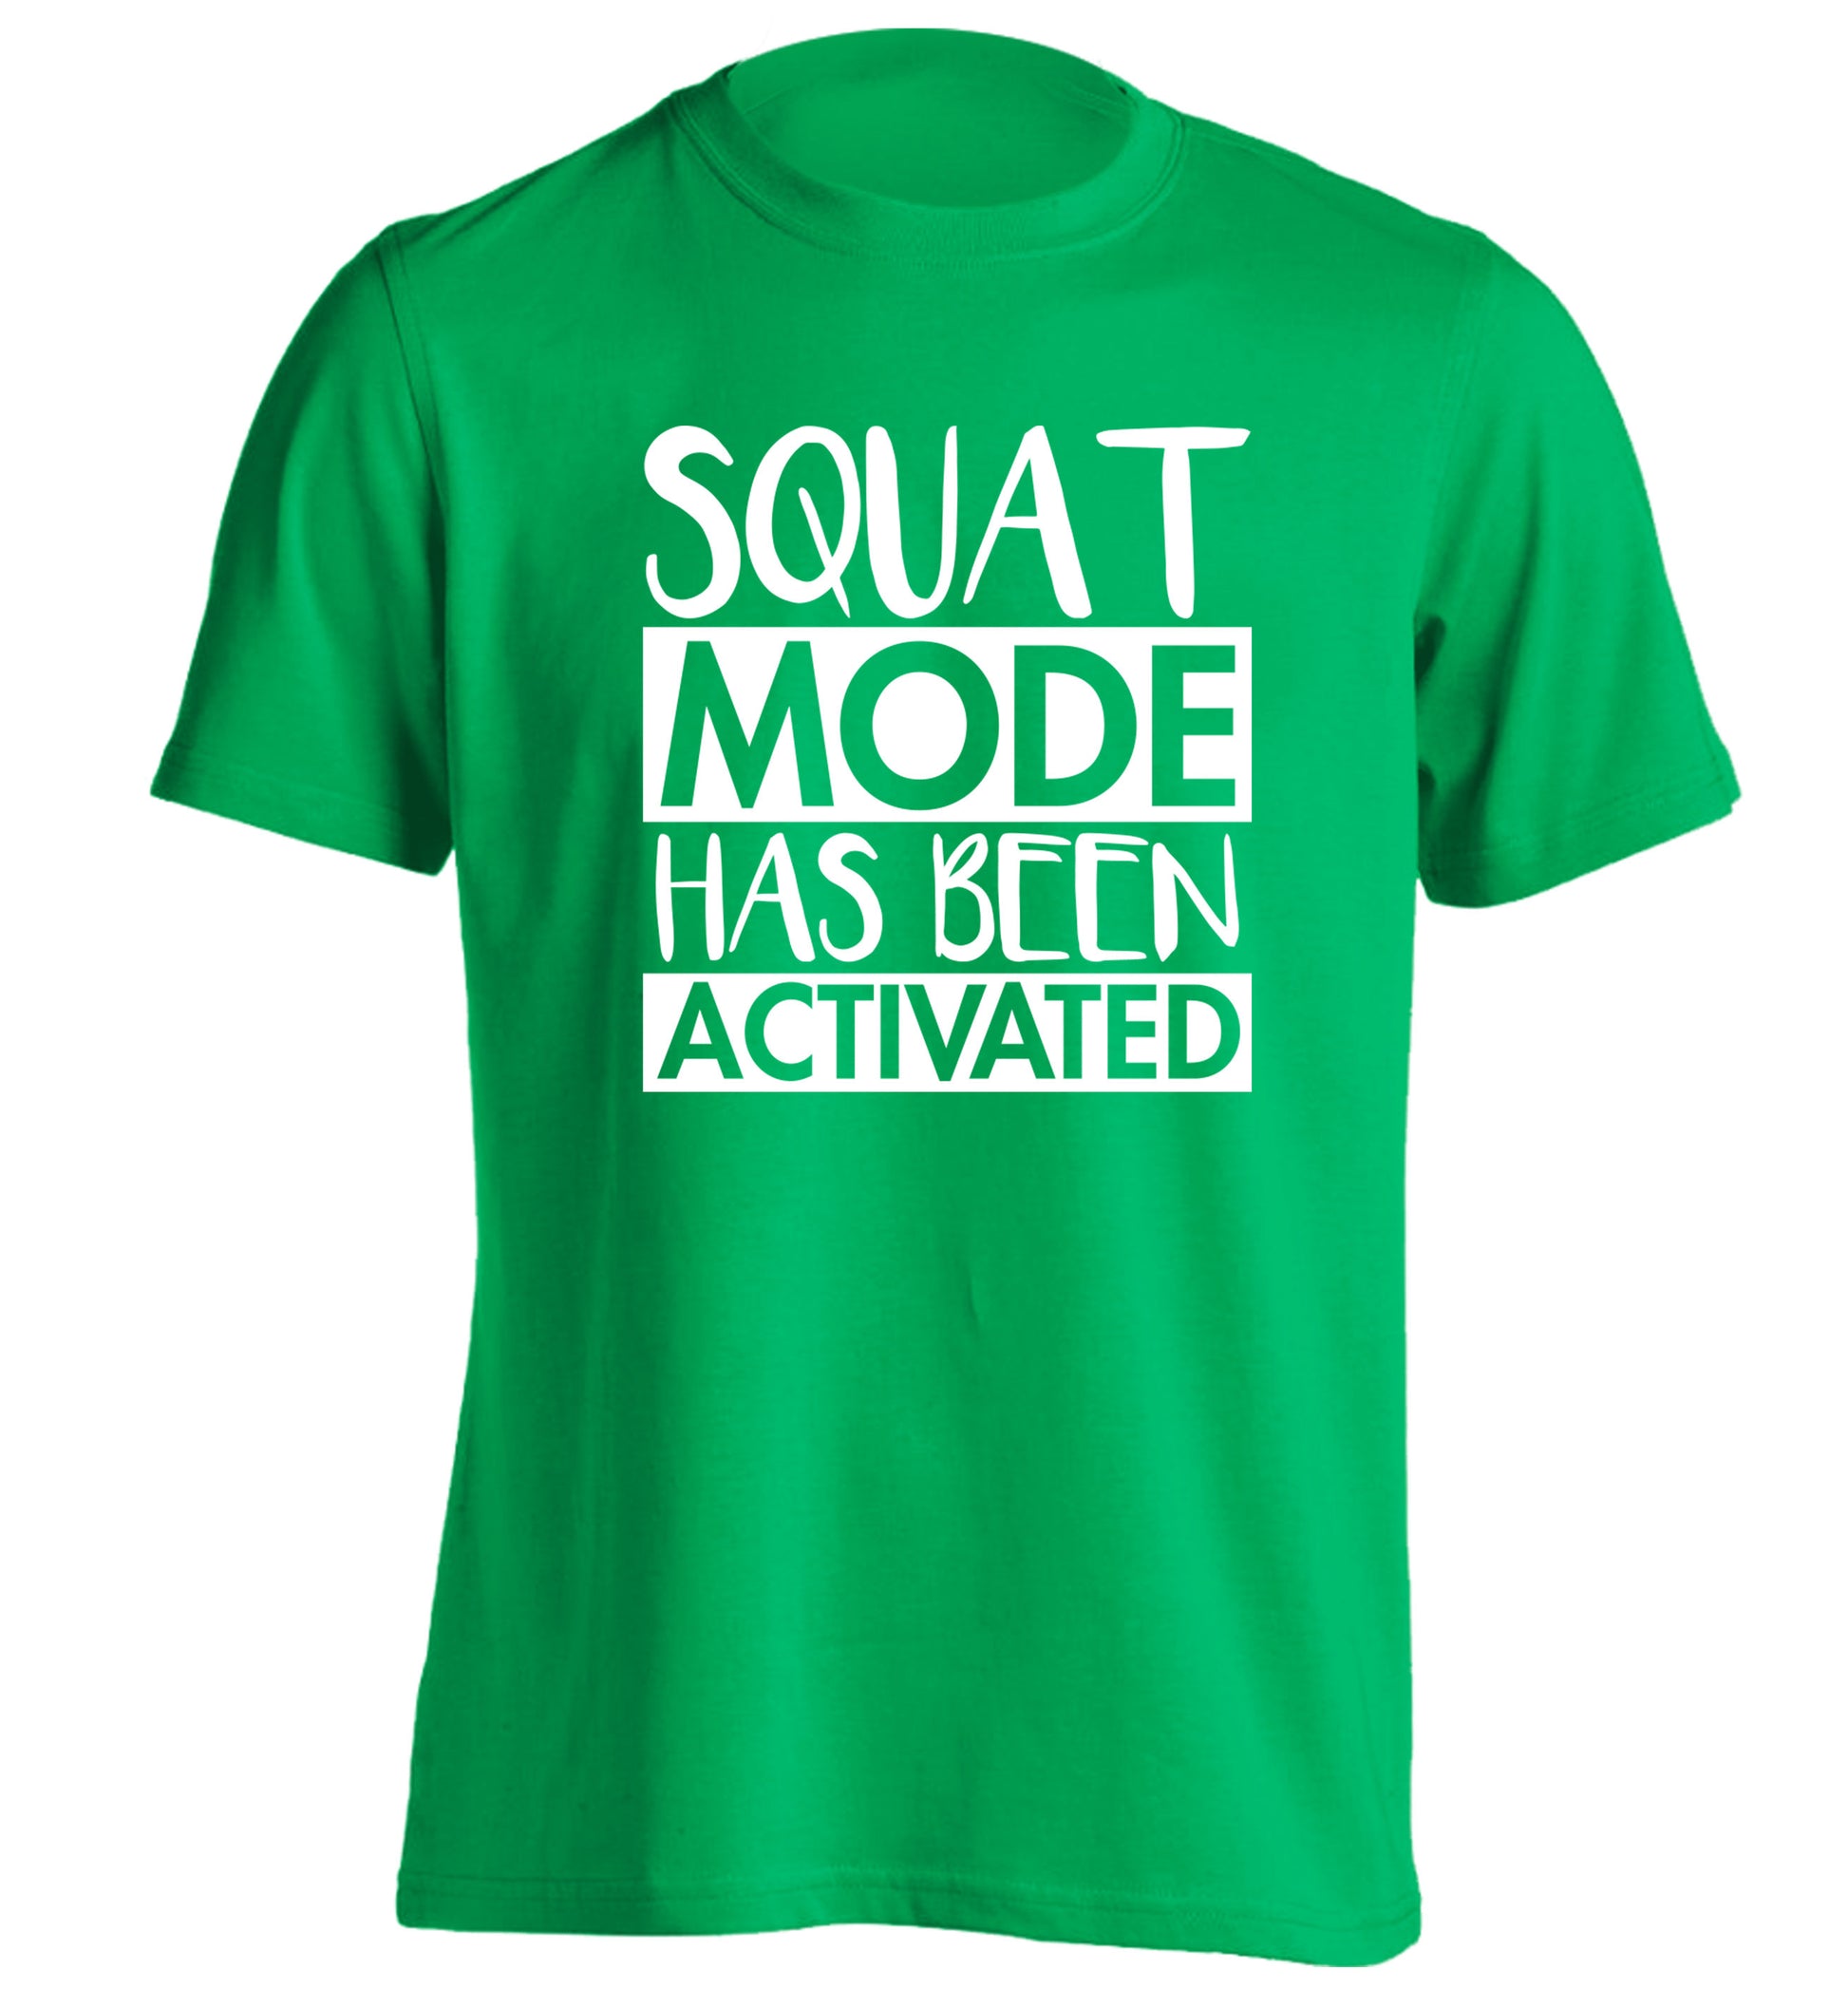 Squat mode activated adults unisex green Tshirt 2XL